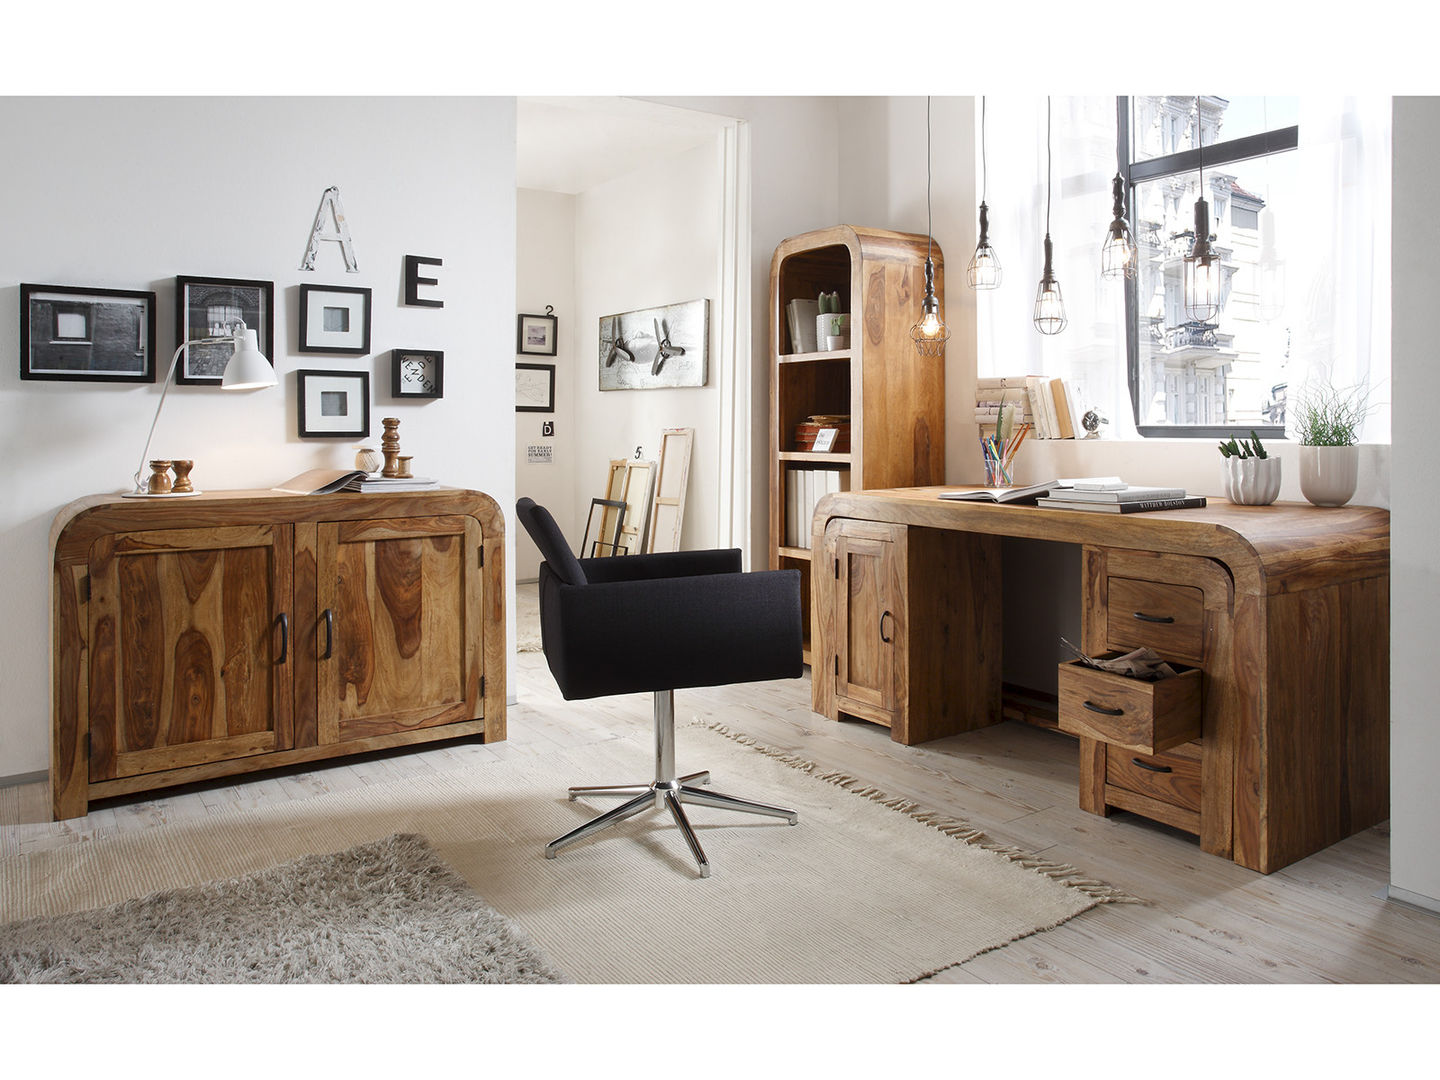 Palisander , Sunchairs GmbH & Co.KG Sunchairs GmbH & Co.KG Eclectic style study/office Wood Wood effect Desks